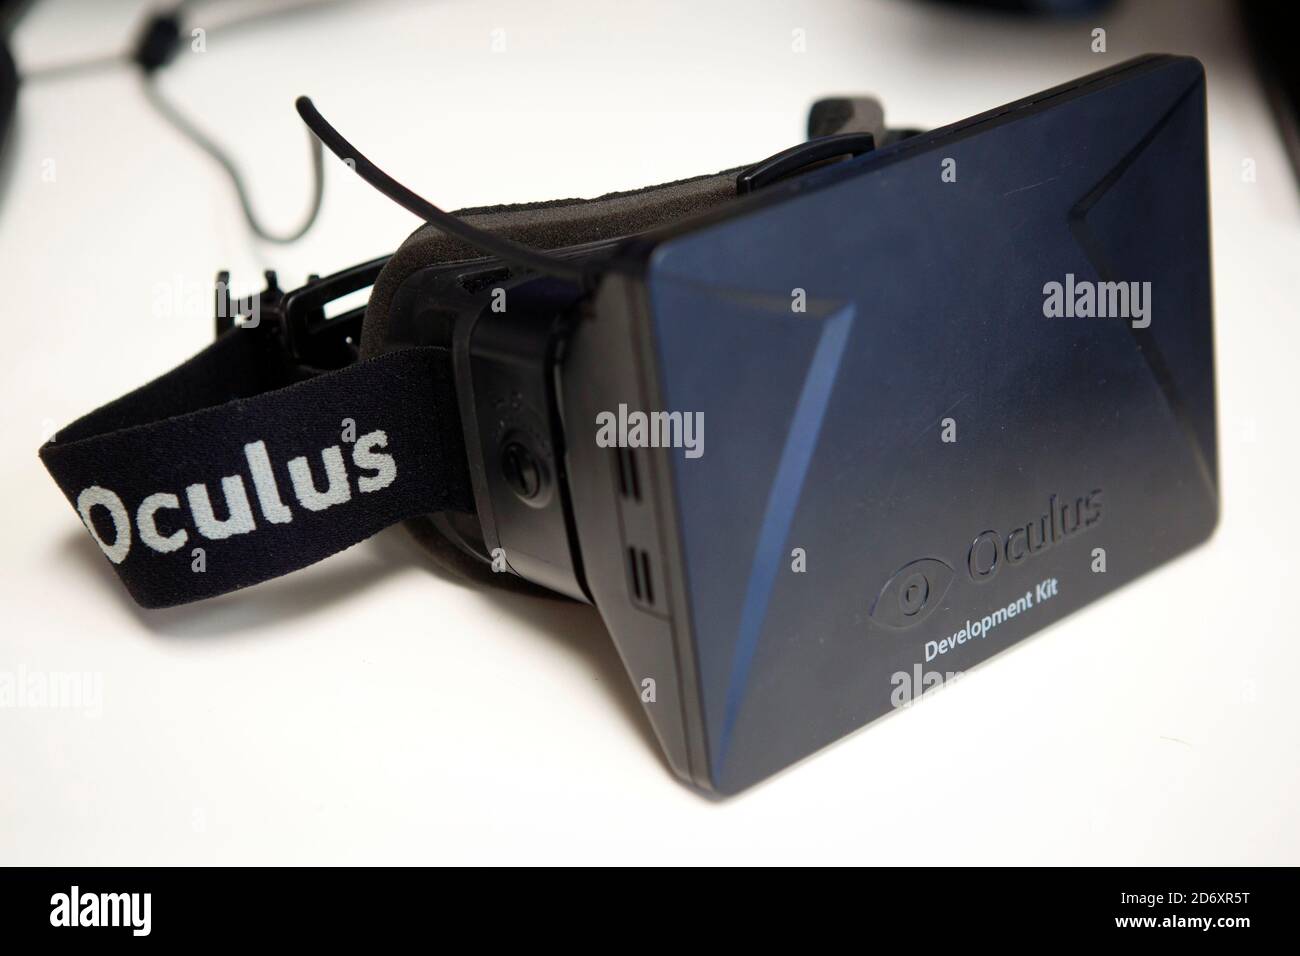 Irvine, California, USA. 6th Feb, 2013. A prototype of the Oculus Rift  virtual reality video game headset the Oculus company is developing in  Irvine, California on Wednesday, February 6, 2013. © 2013